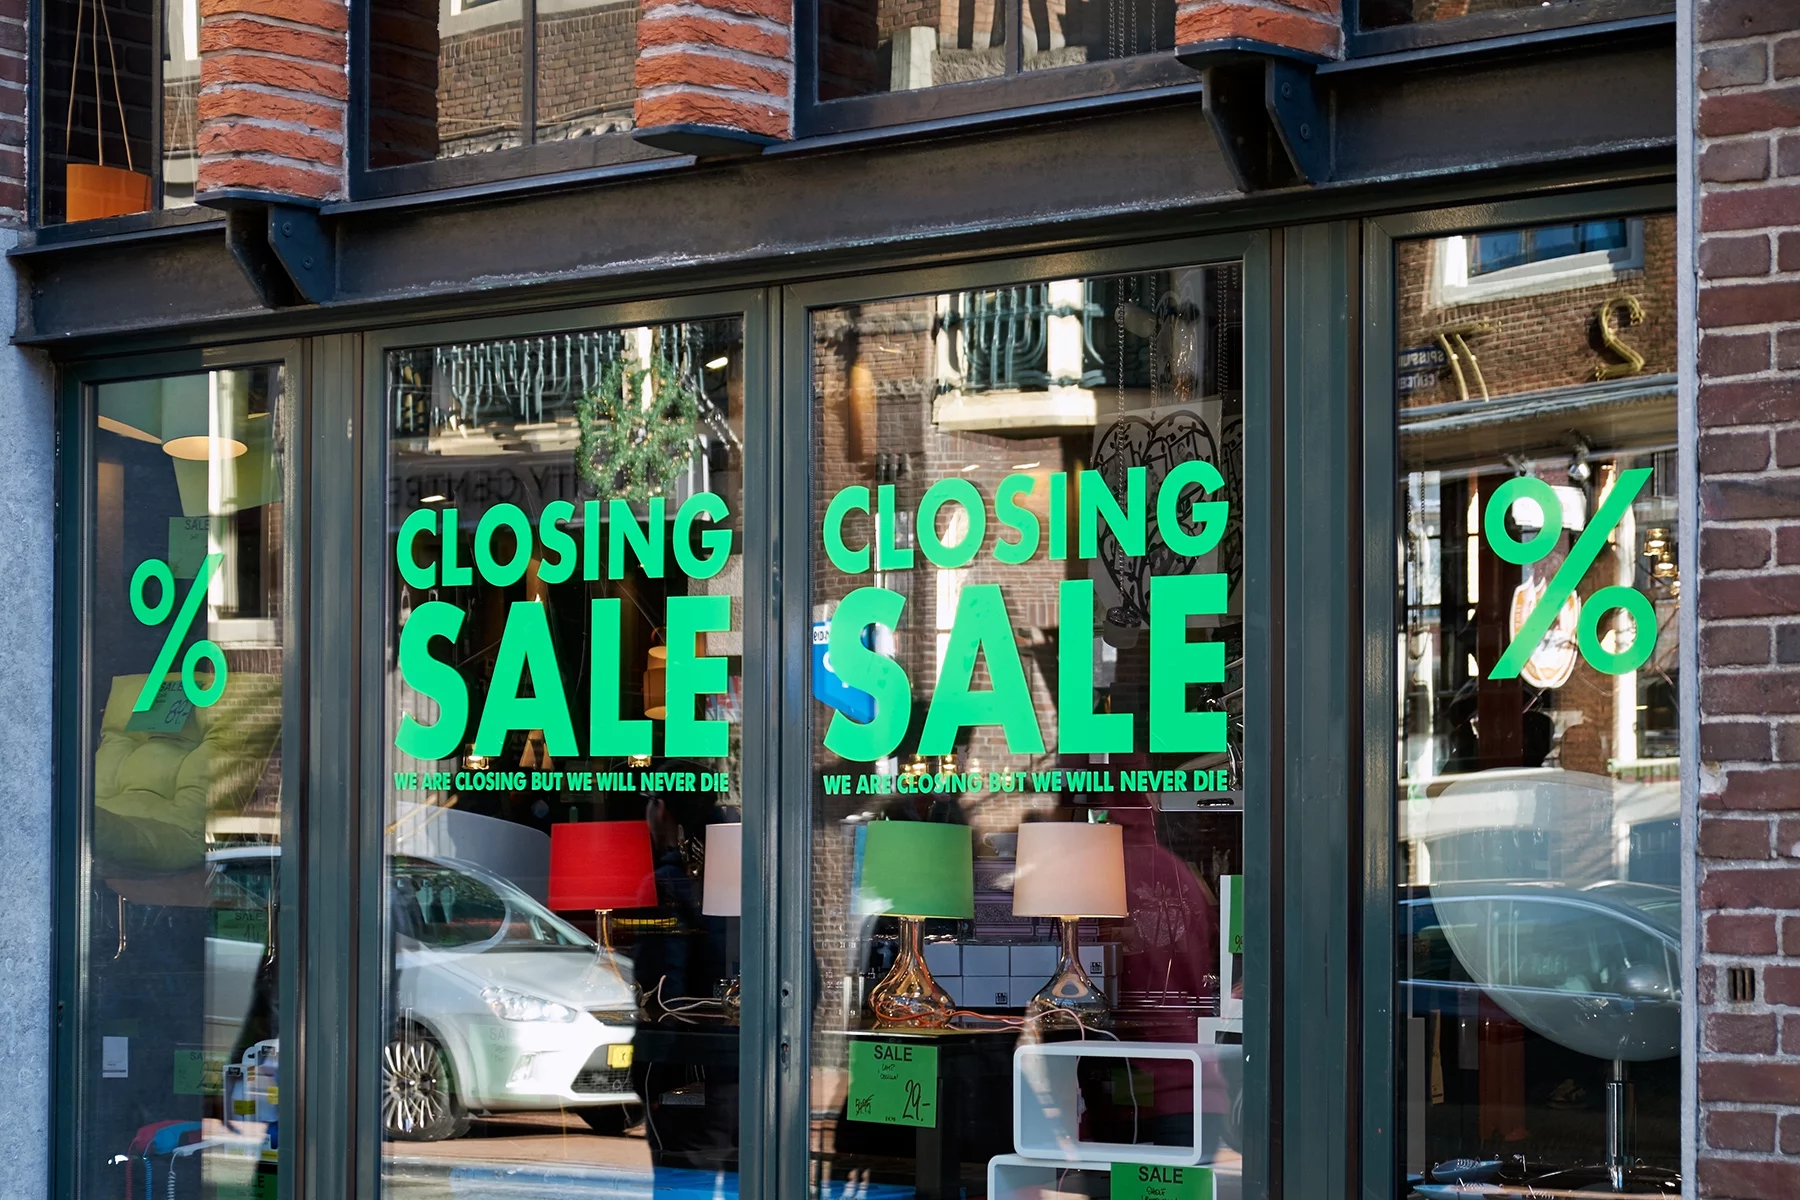 Closing sale signs in an Amsterdam store window